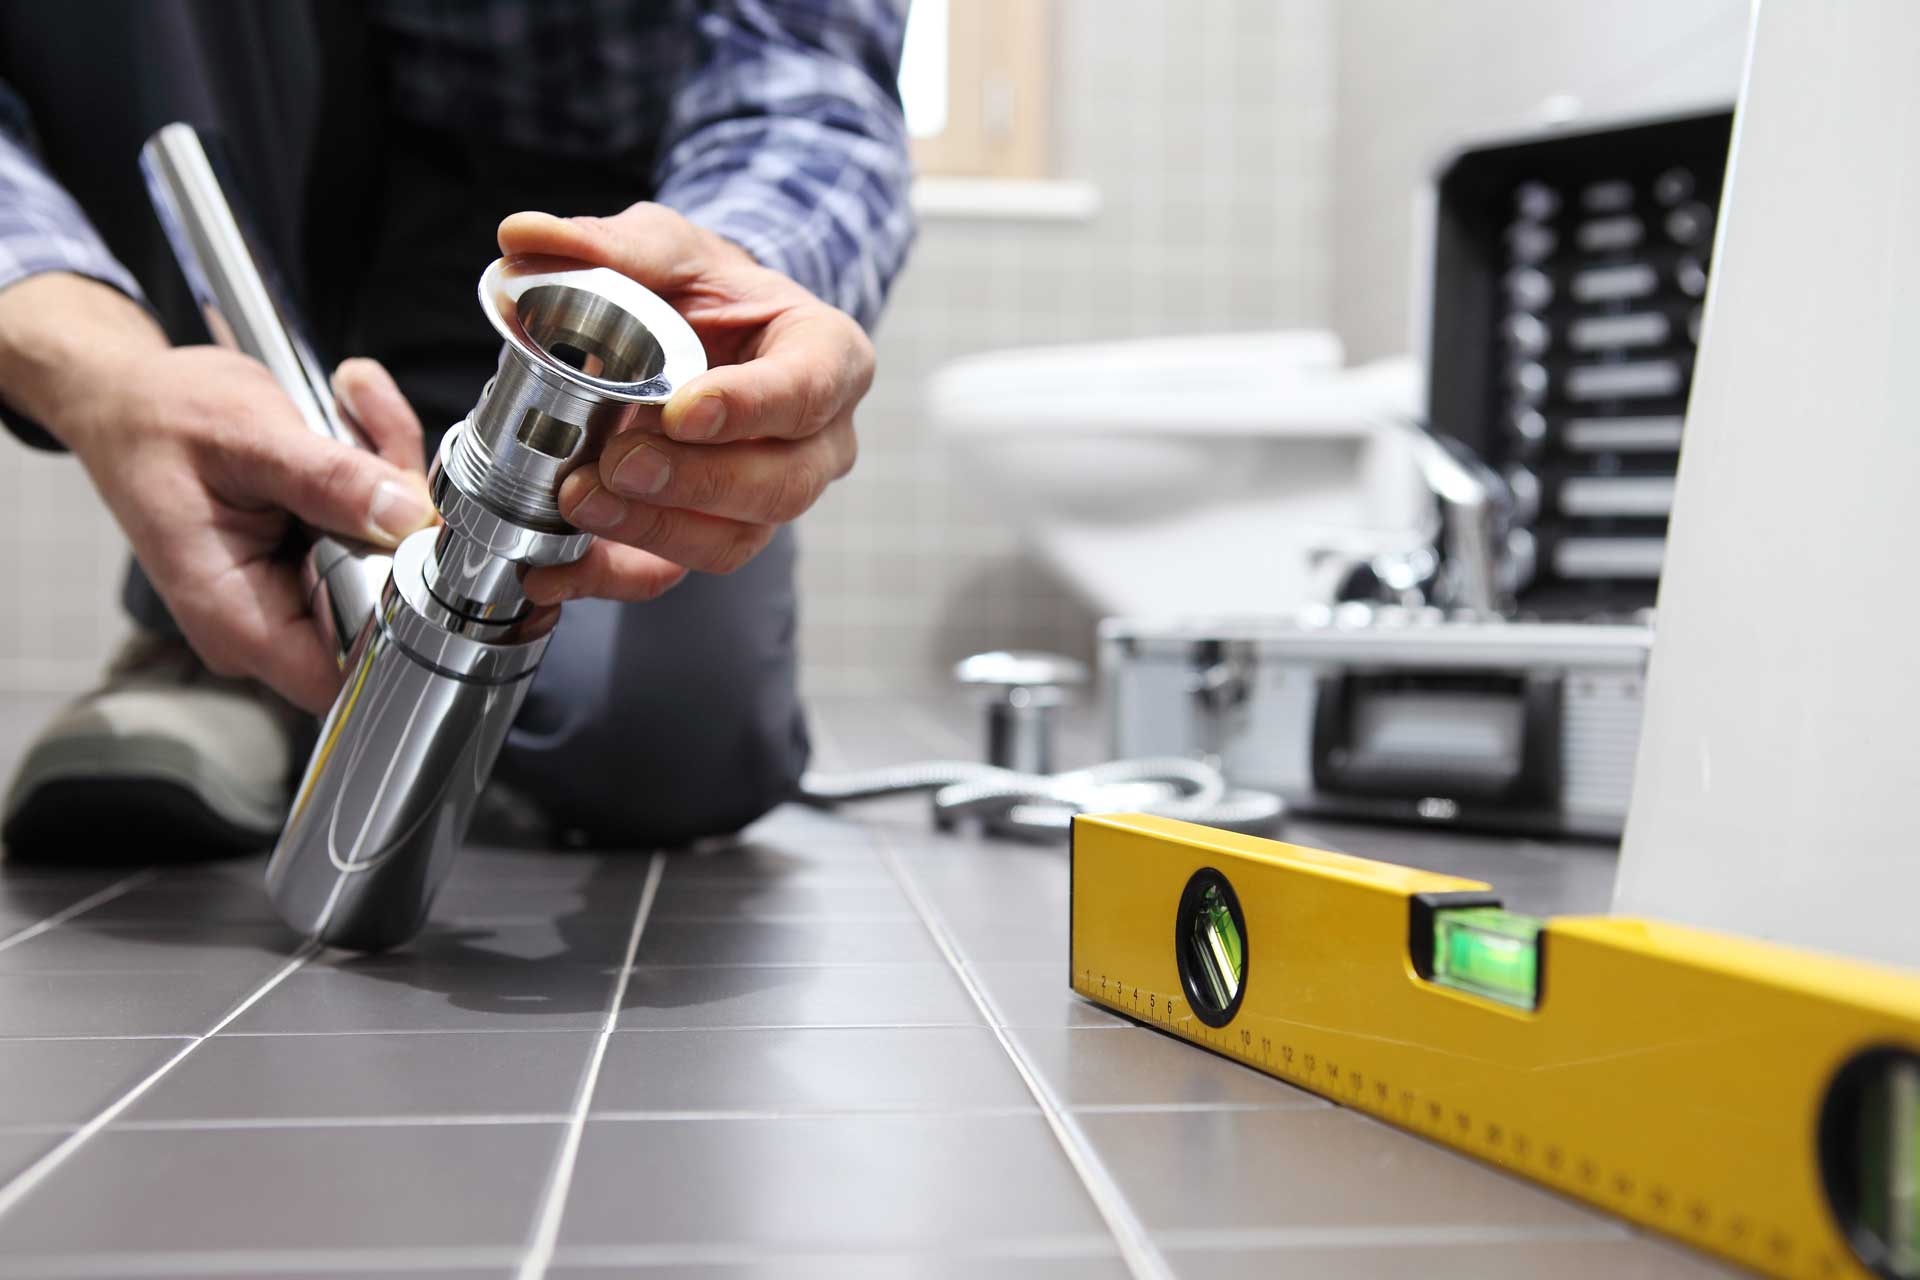 Plumbing Upgrades That Will Increase Your Home's Worth (If Selling Your Home)